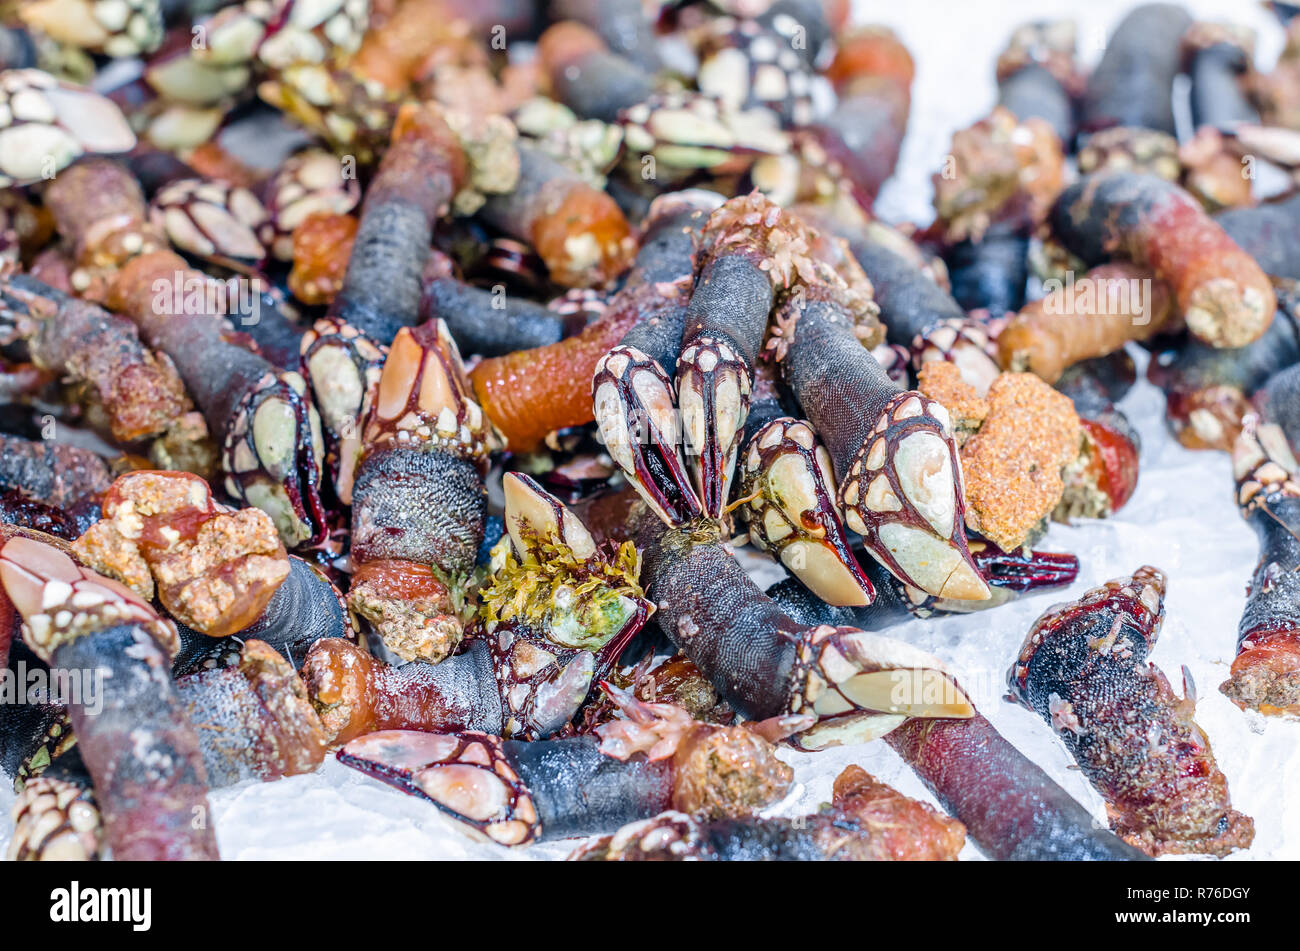 Goose barnacles in a fish market Stock Photo